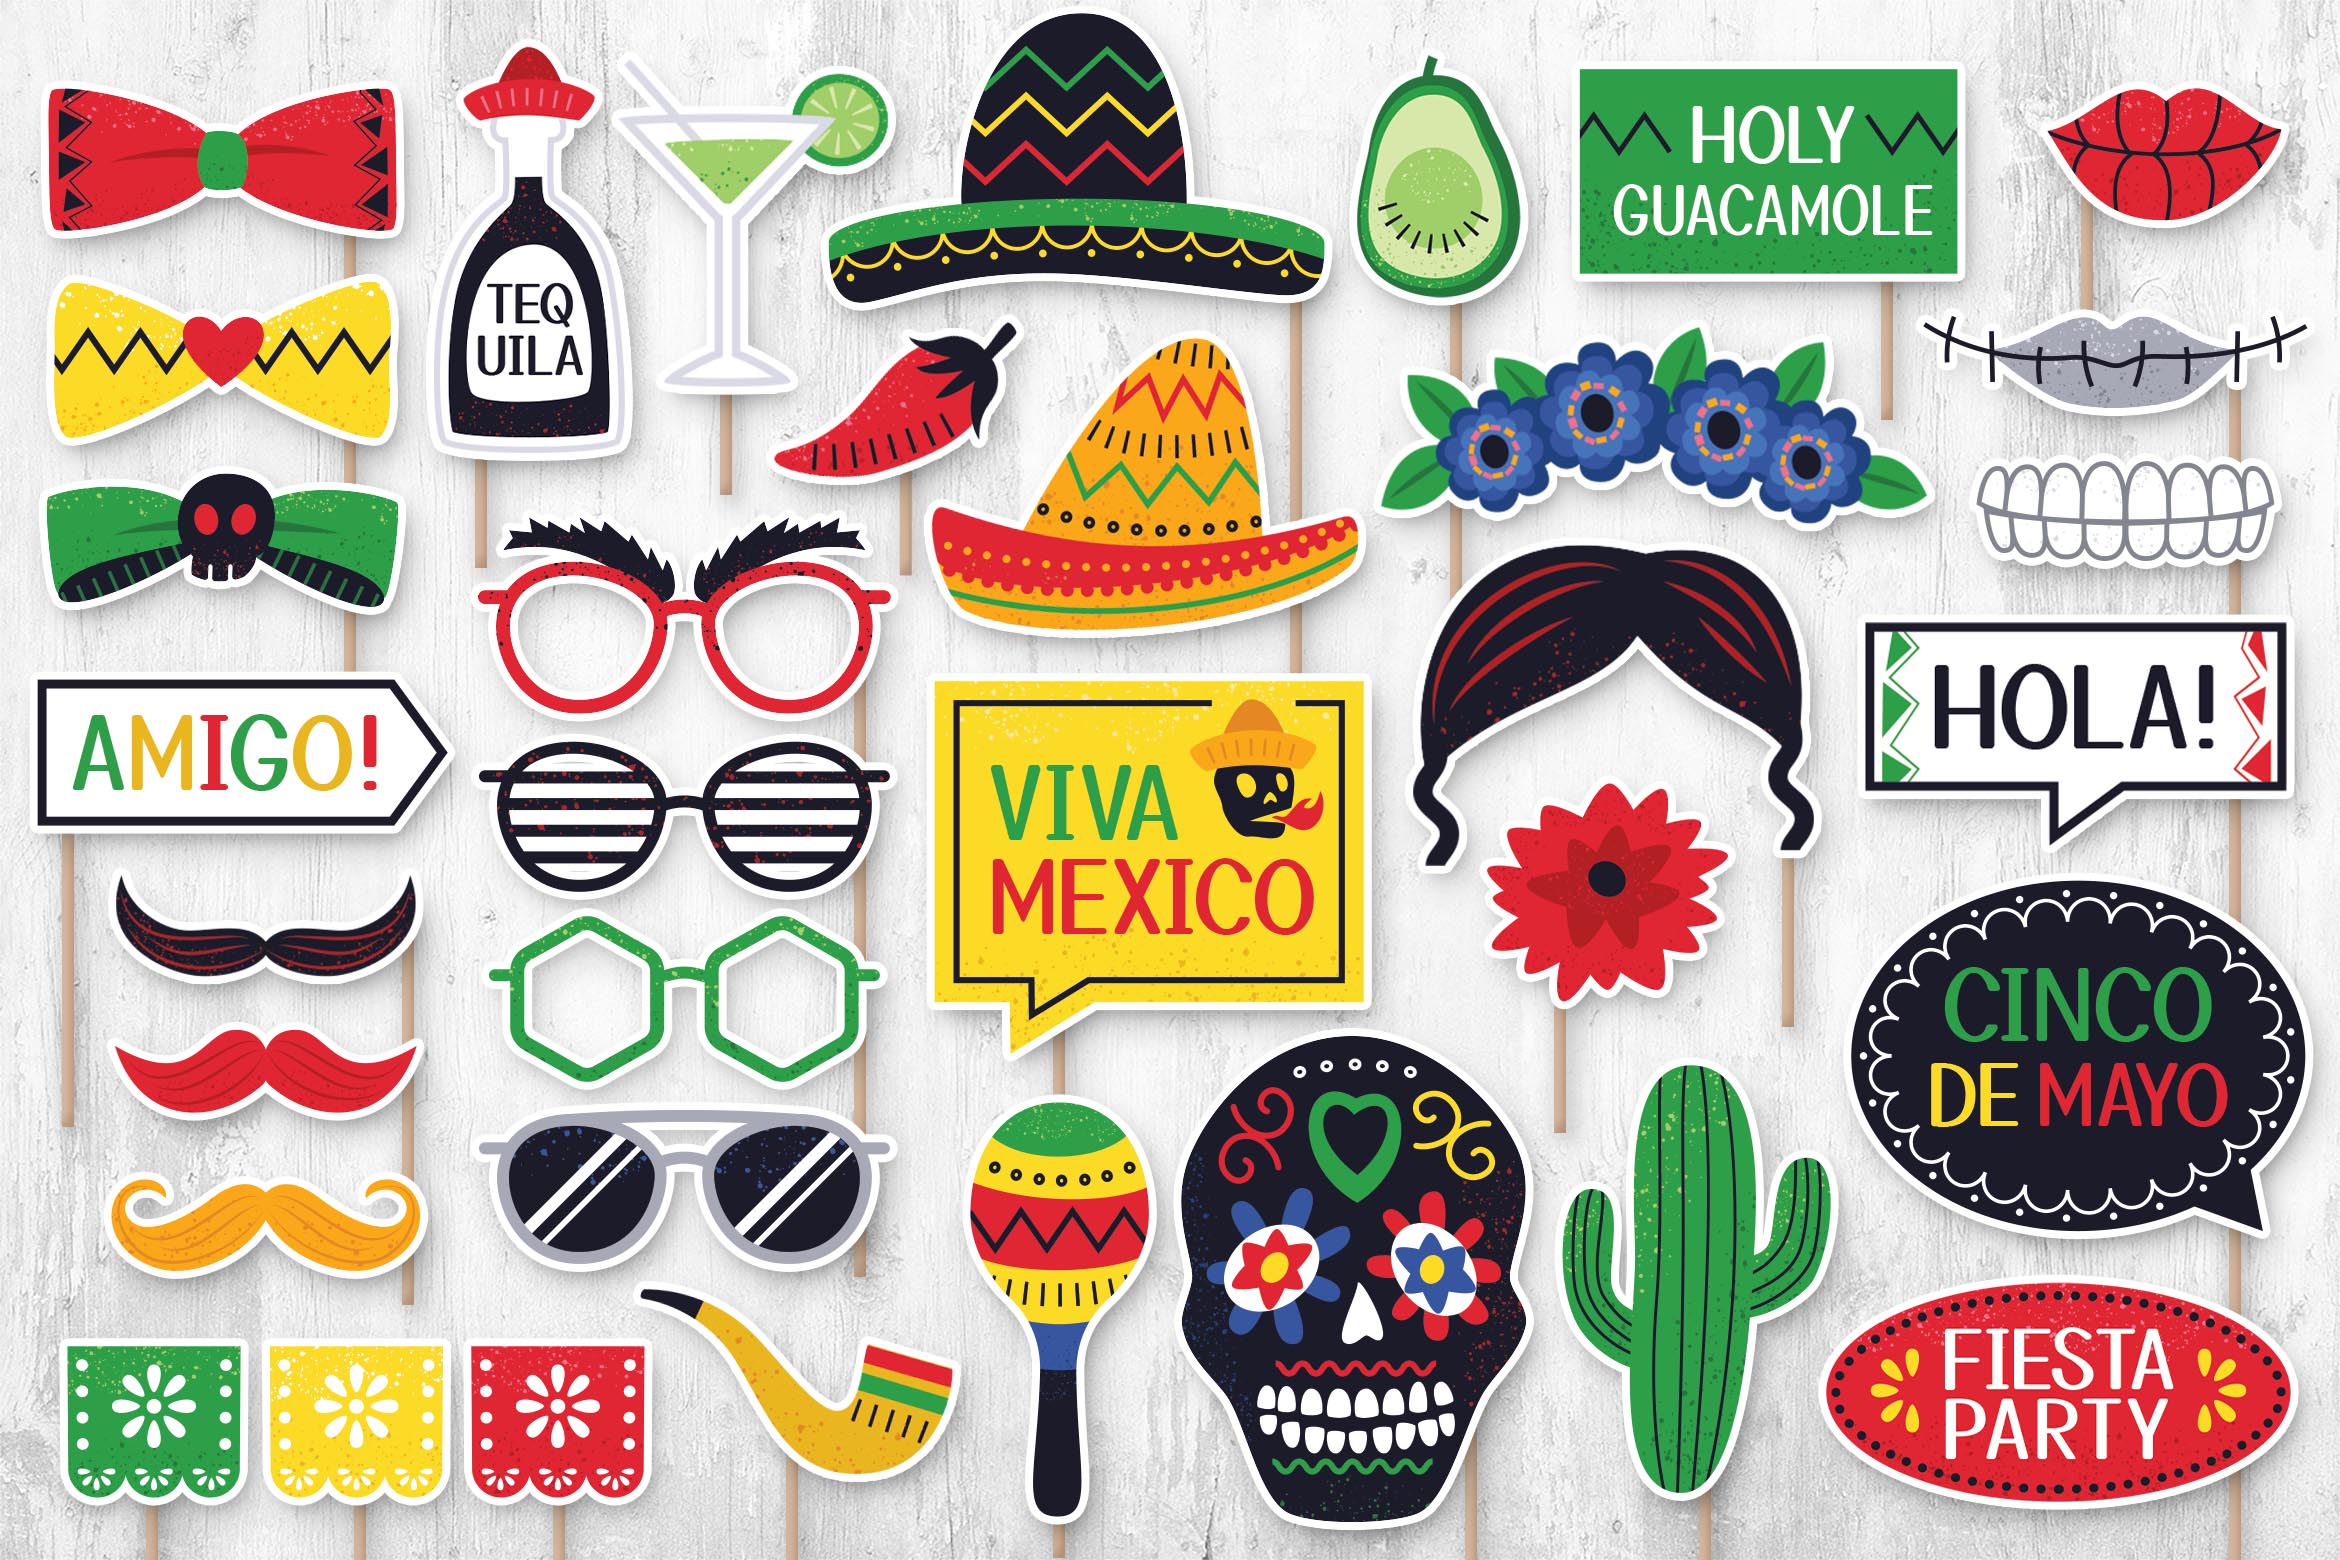 Mexican Photo Booth Digital Props (PSD, PNG, PDF formats)